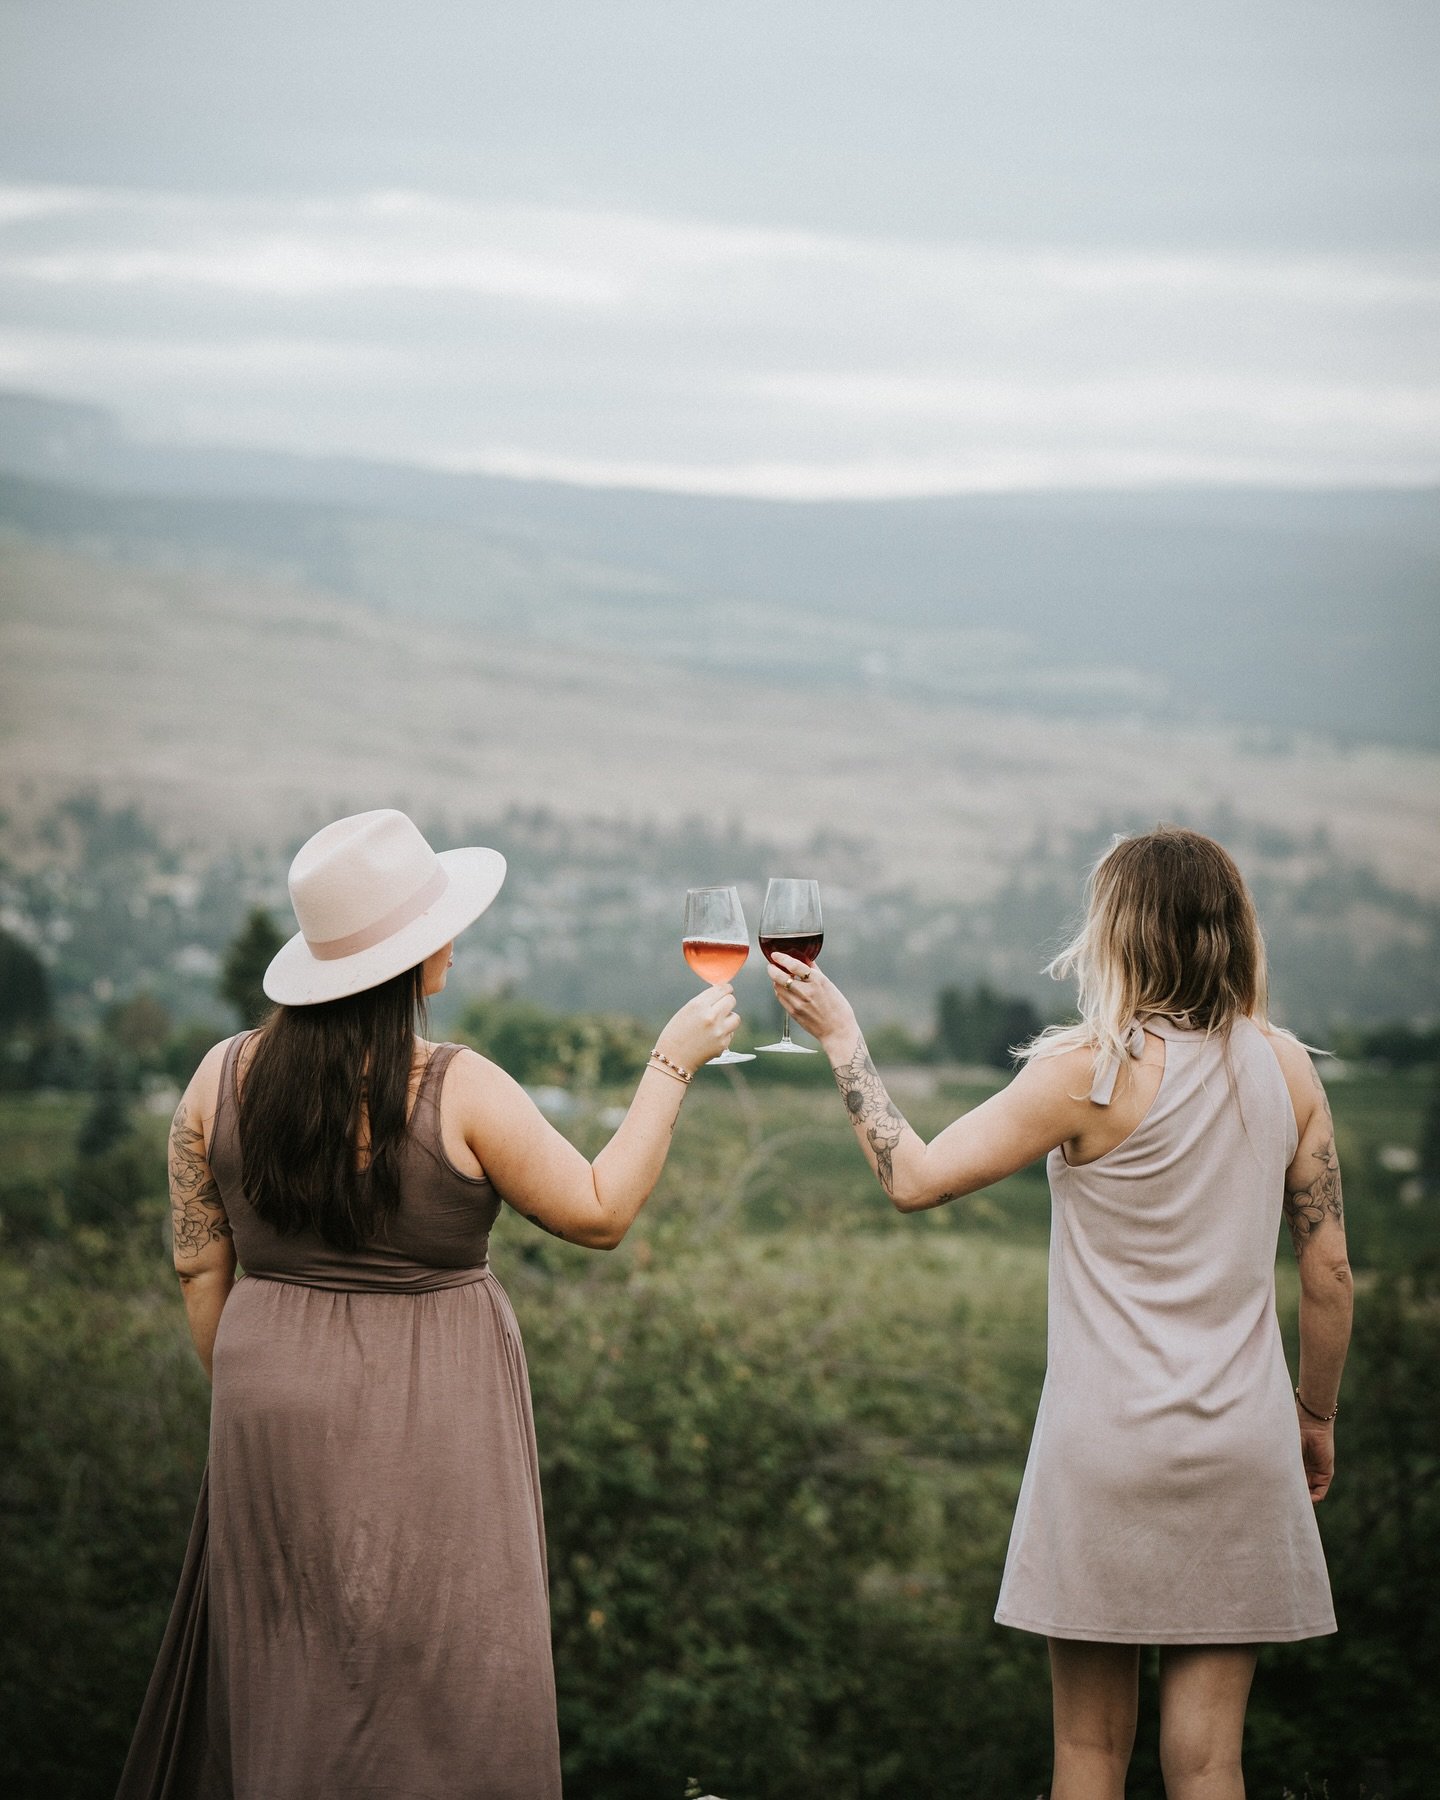 Cheers to the weekend!  We are just ONE WEEK away from opening day! 

Grab your bestie and come hang with us starting May 3! Enjoy some incredible wood fire pizza and delicious wine in the beautiful Okanagan sunshine! ☀️

📸 Lewko Photography 

 #lak